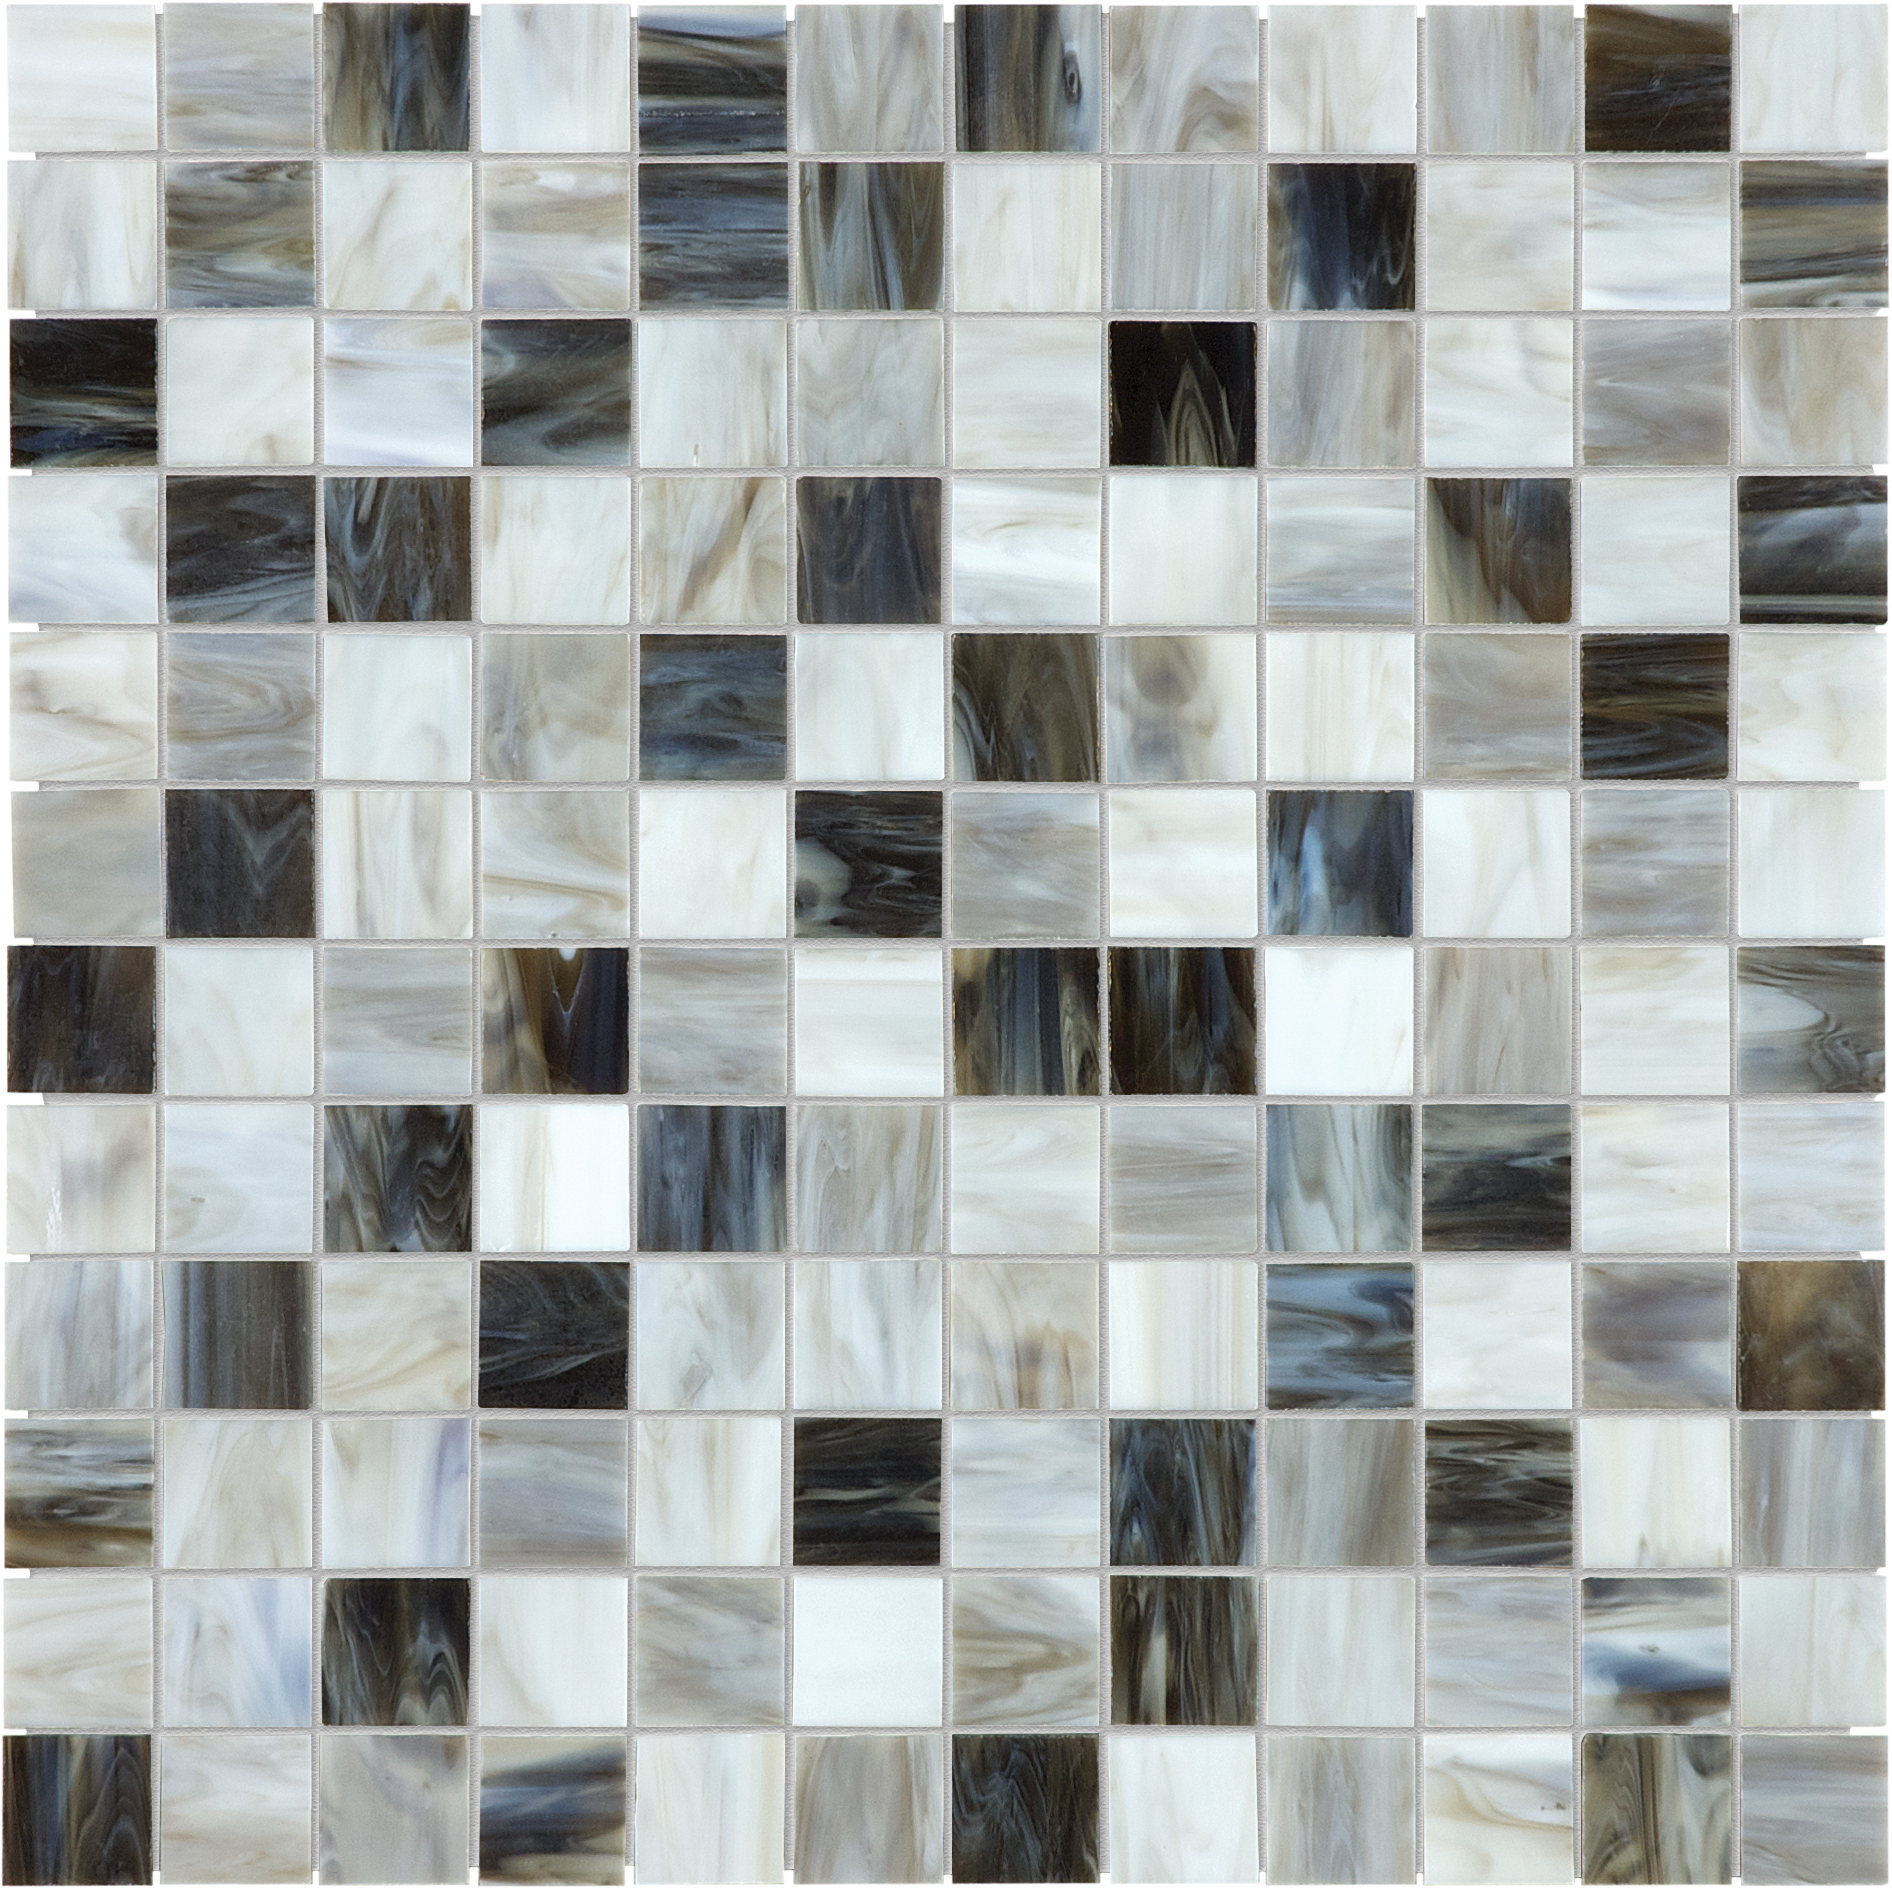 alabastro straight stack 1x1-inch pattern fused glass mosaic from baroque anatolia collection distributed by surface group international glossy finish rounded edge mesh shape